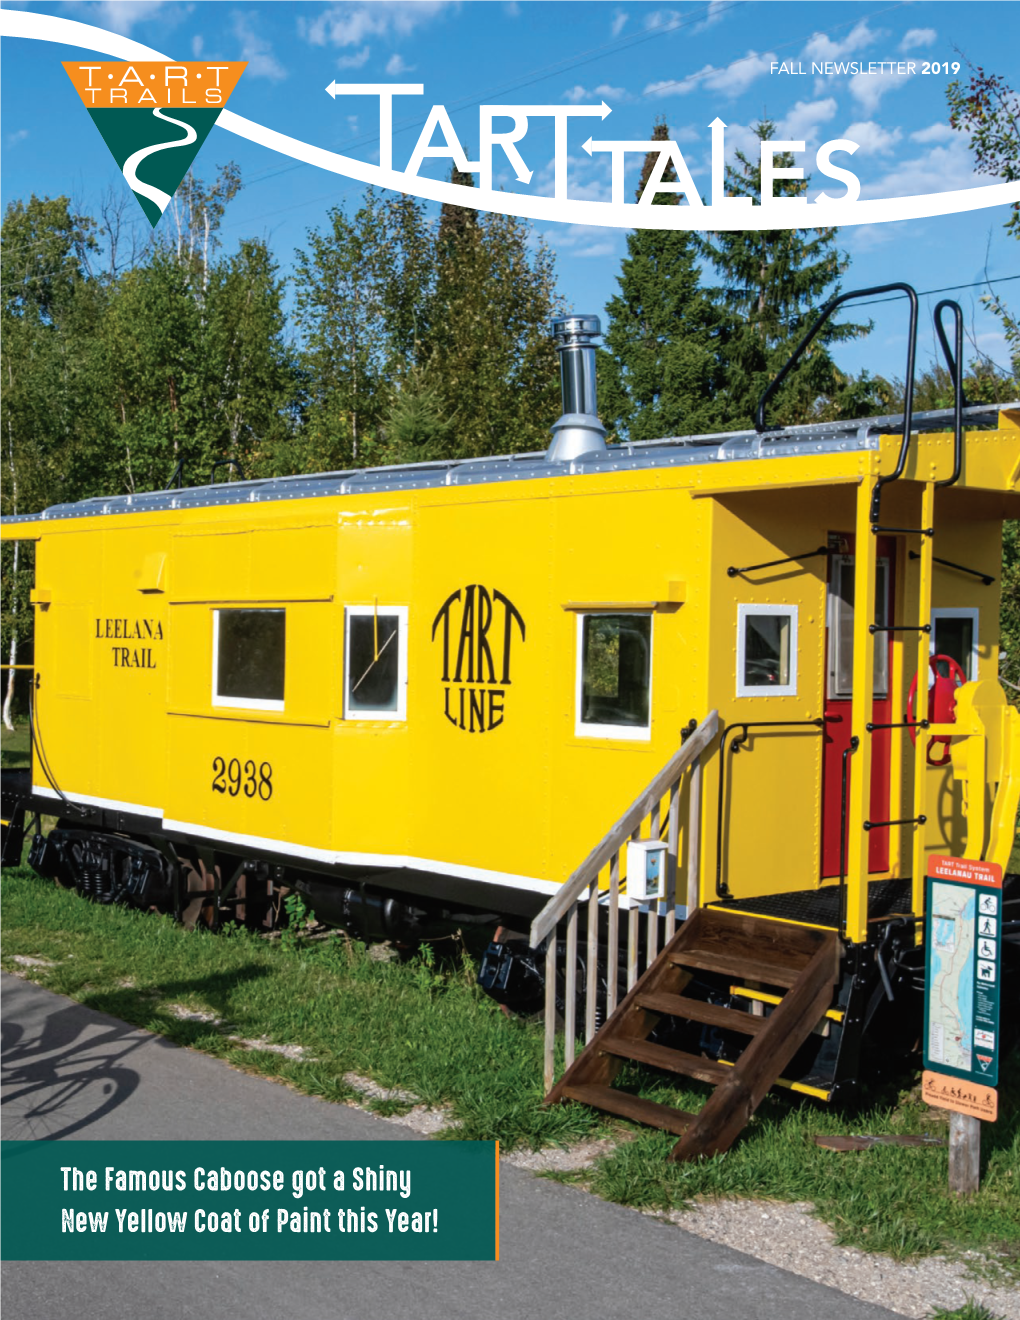 The Famous Caboose Got a Shiny New Yellow Coat of Paint This Year! FALL NEWSLETTER 2019